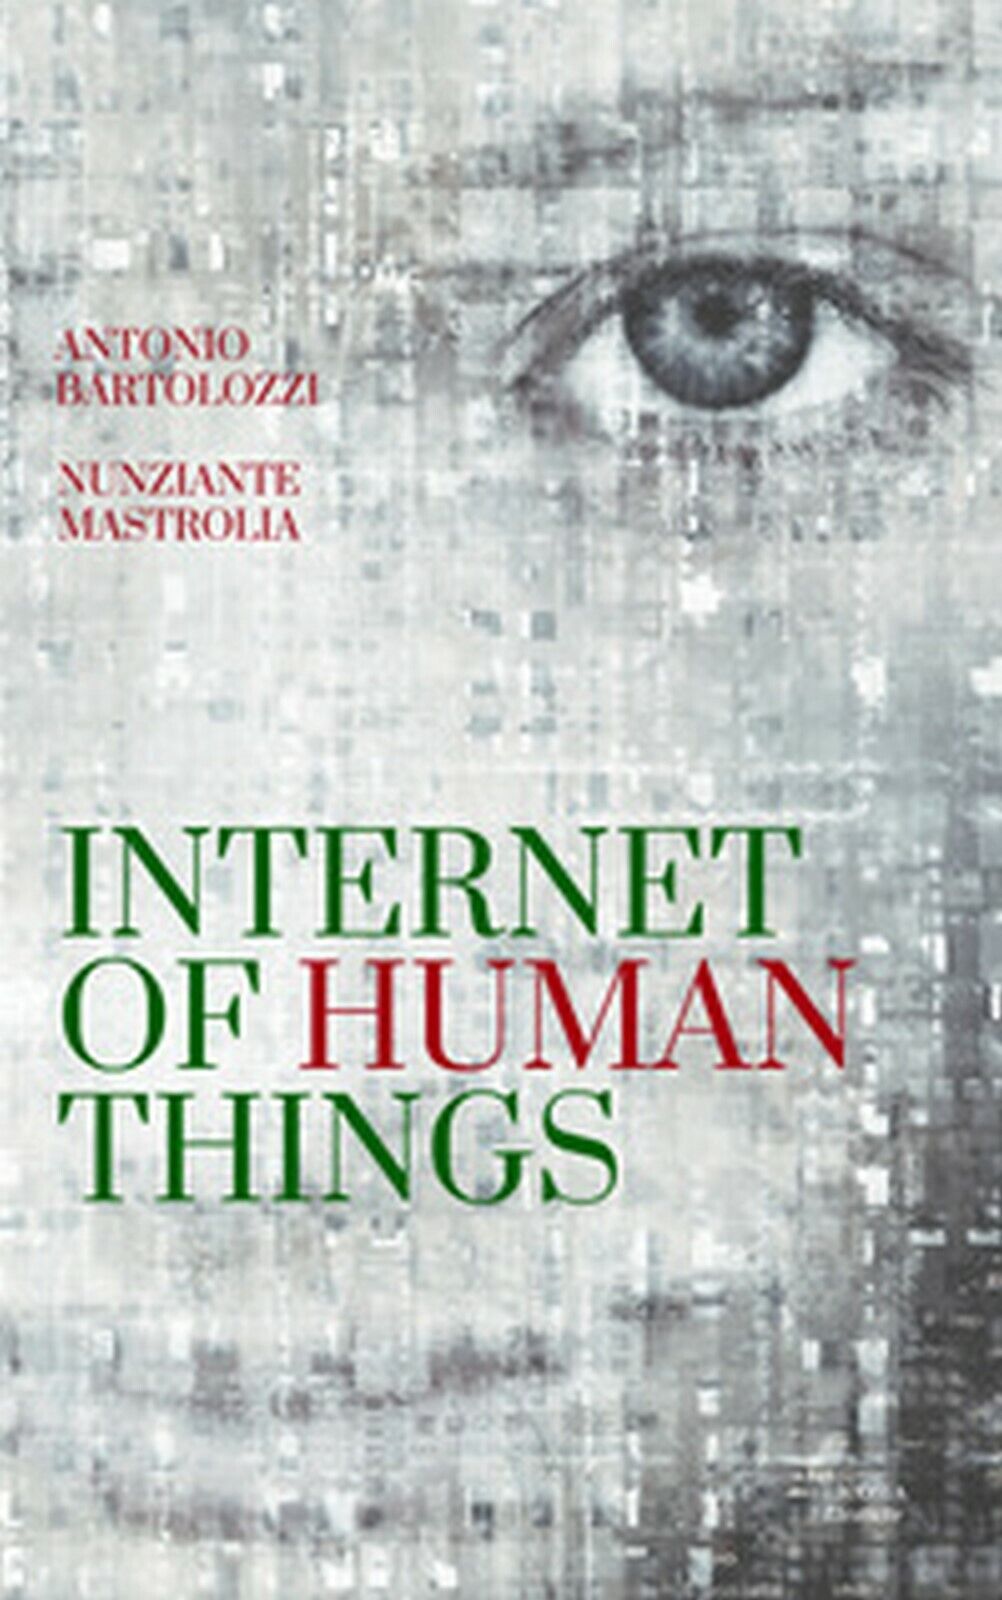 Internet of Human Things (Licosia, 2018)